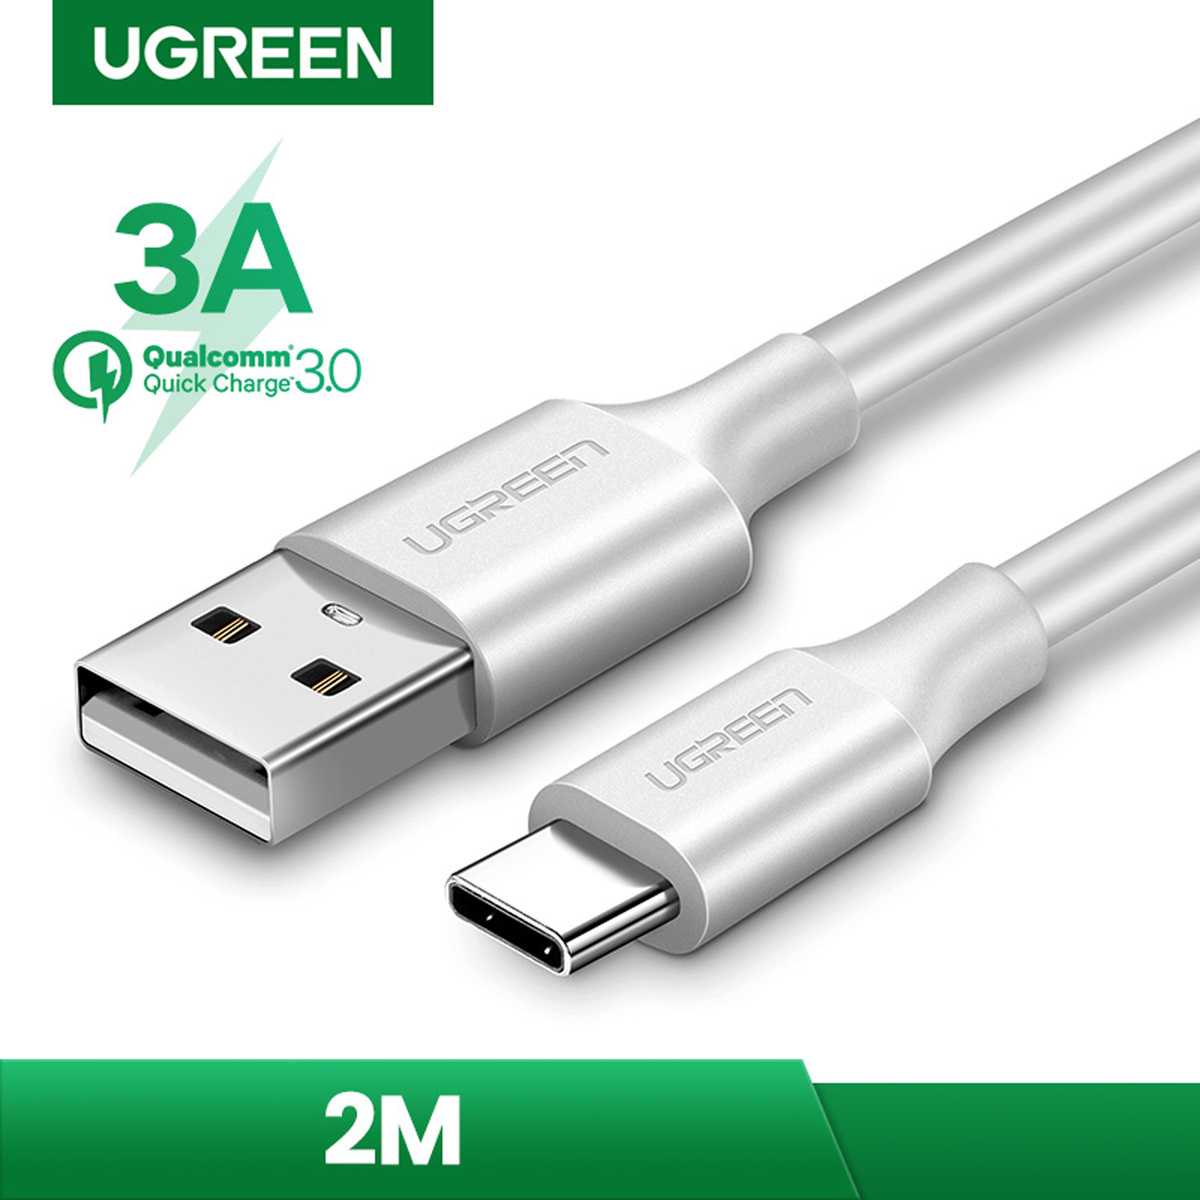 Ugreen USB-A to USB-C Cable 2 m, White, 60123